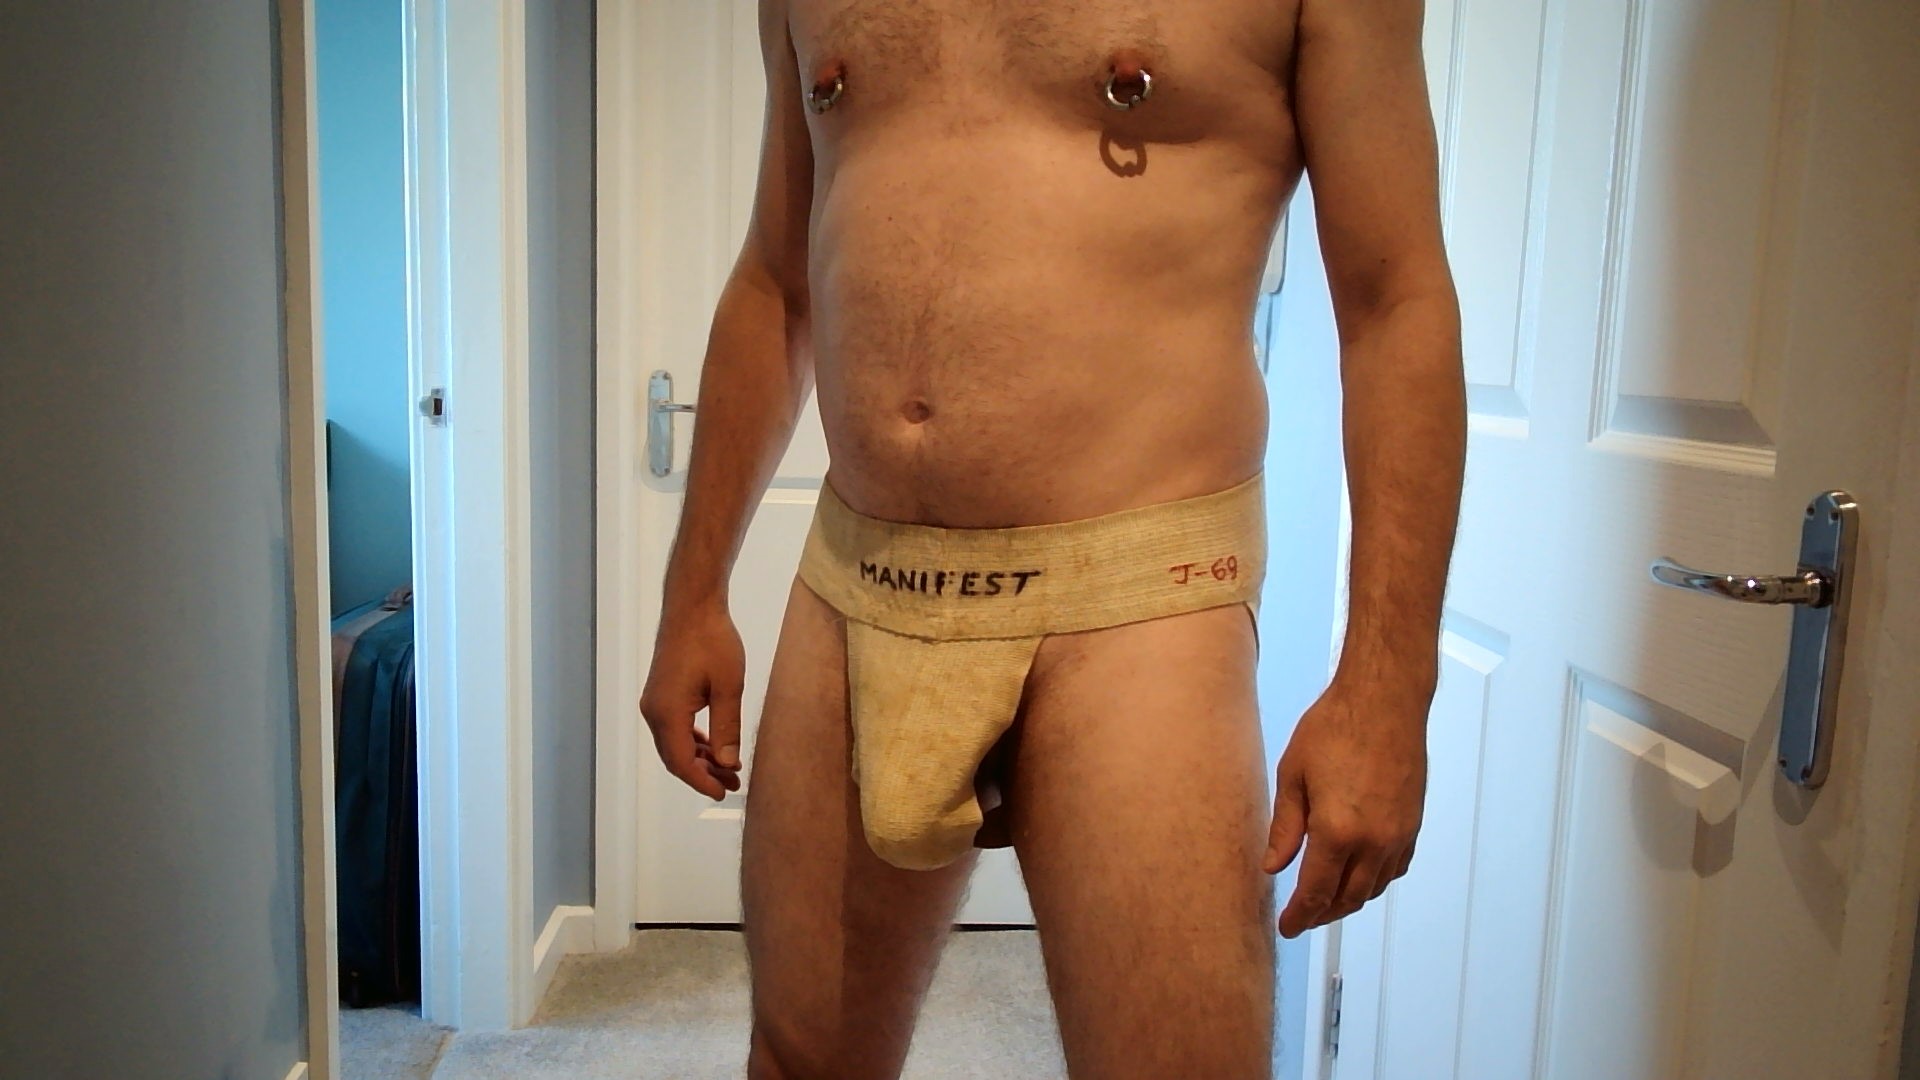 Front view of the very slack pouch.  More of a loin cloth than a supporter.